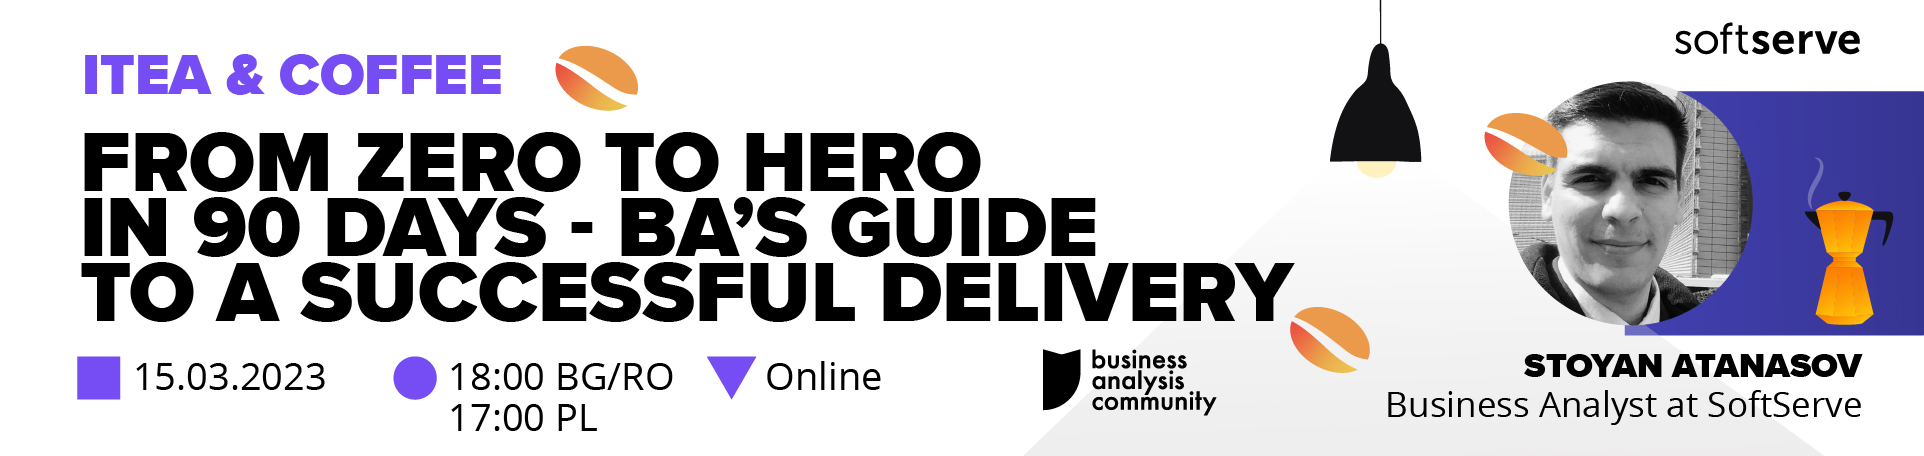 ITea and Coffee: From Zero to Hero in 90 days - BAs guide to a successful delivery